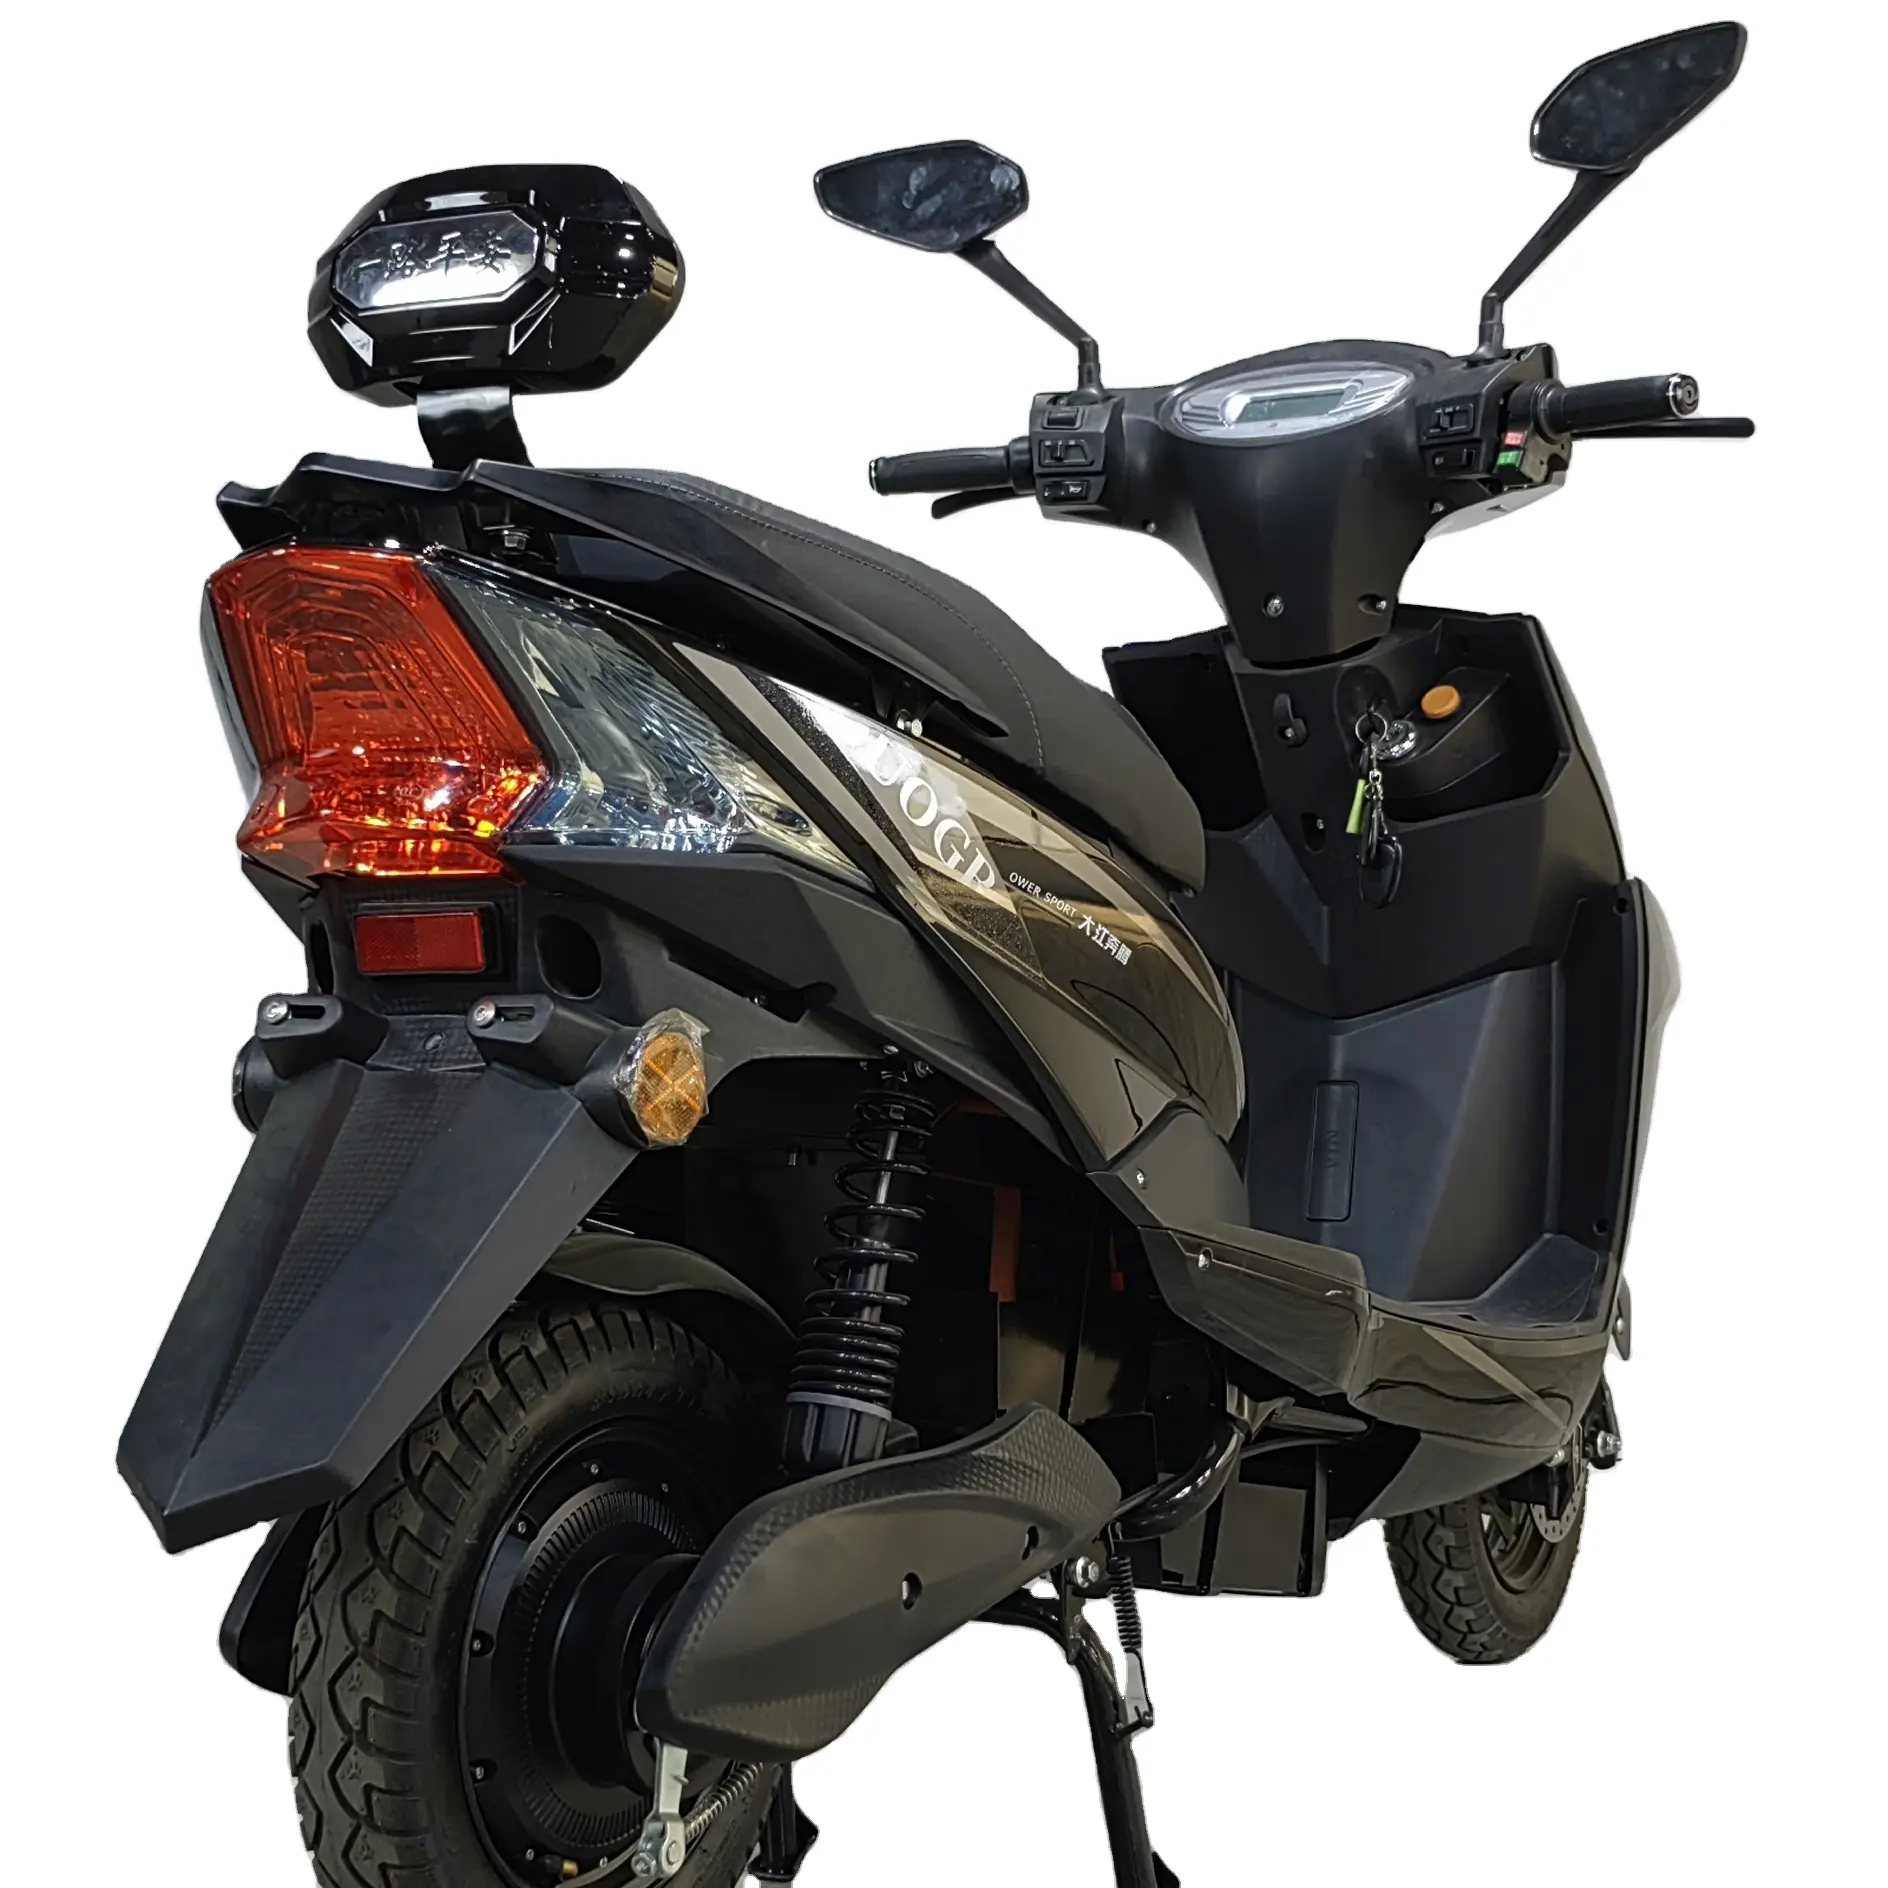 Hot sale Scooter 800W 72V Fast High Speed Electric Motorcycle